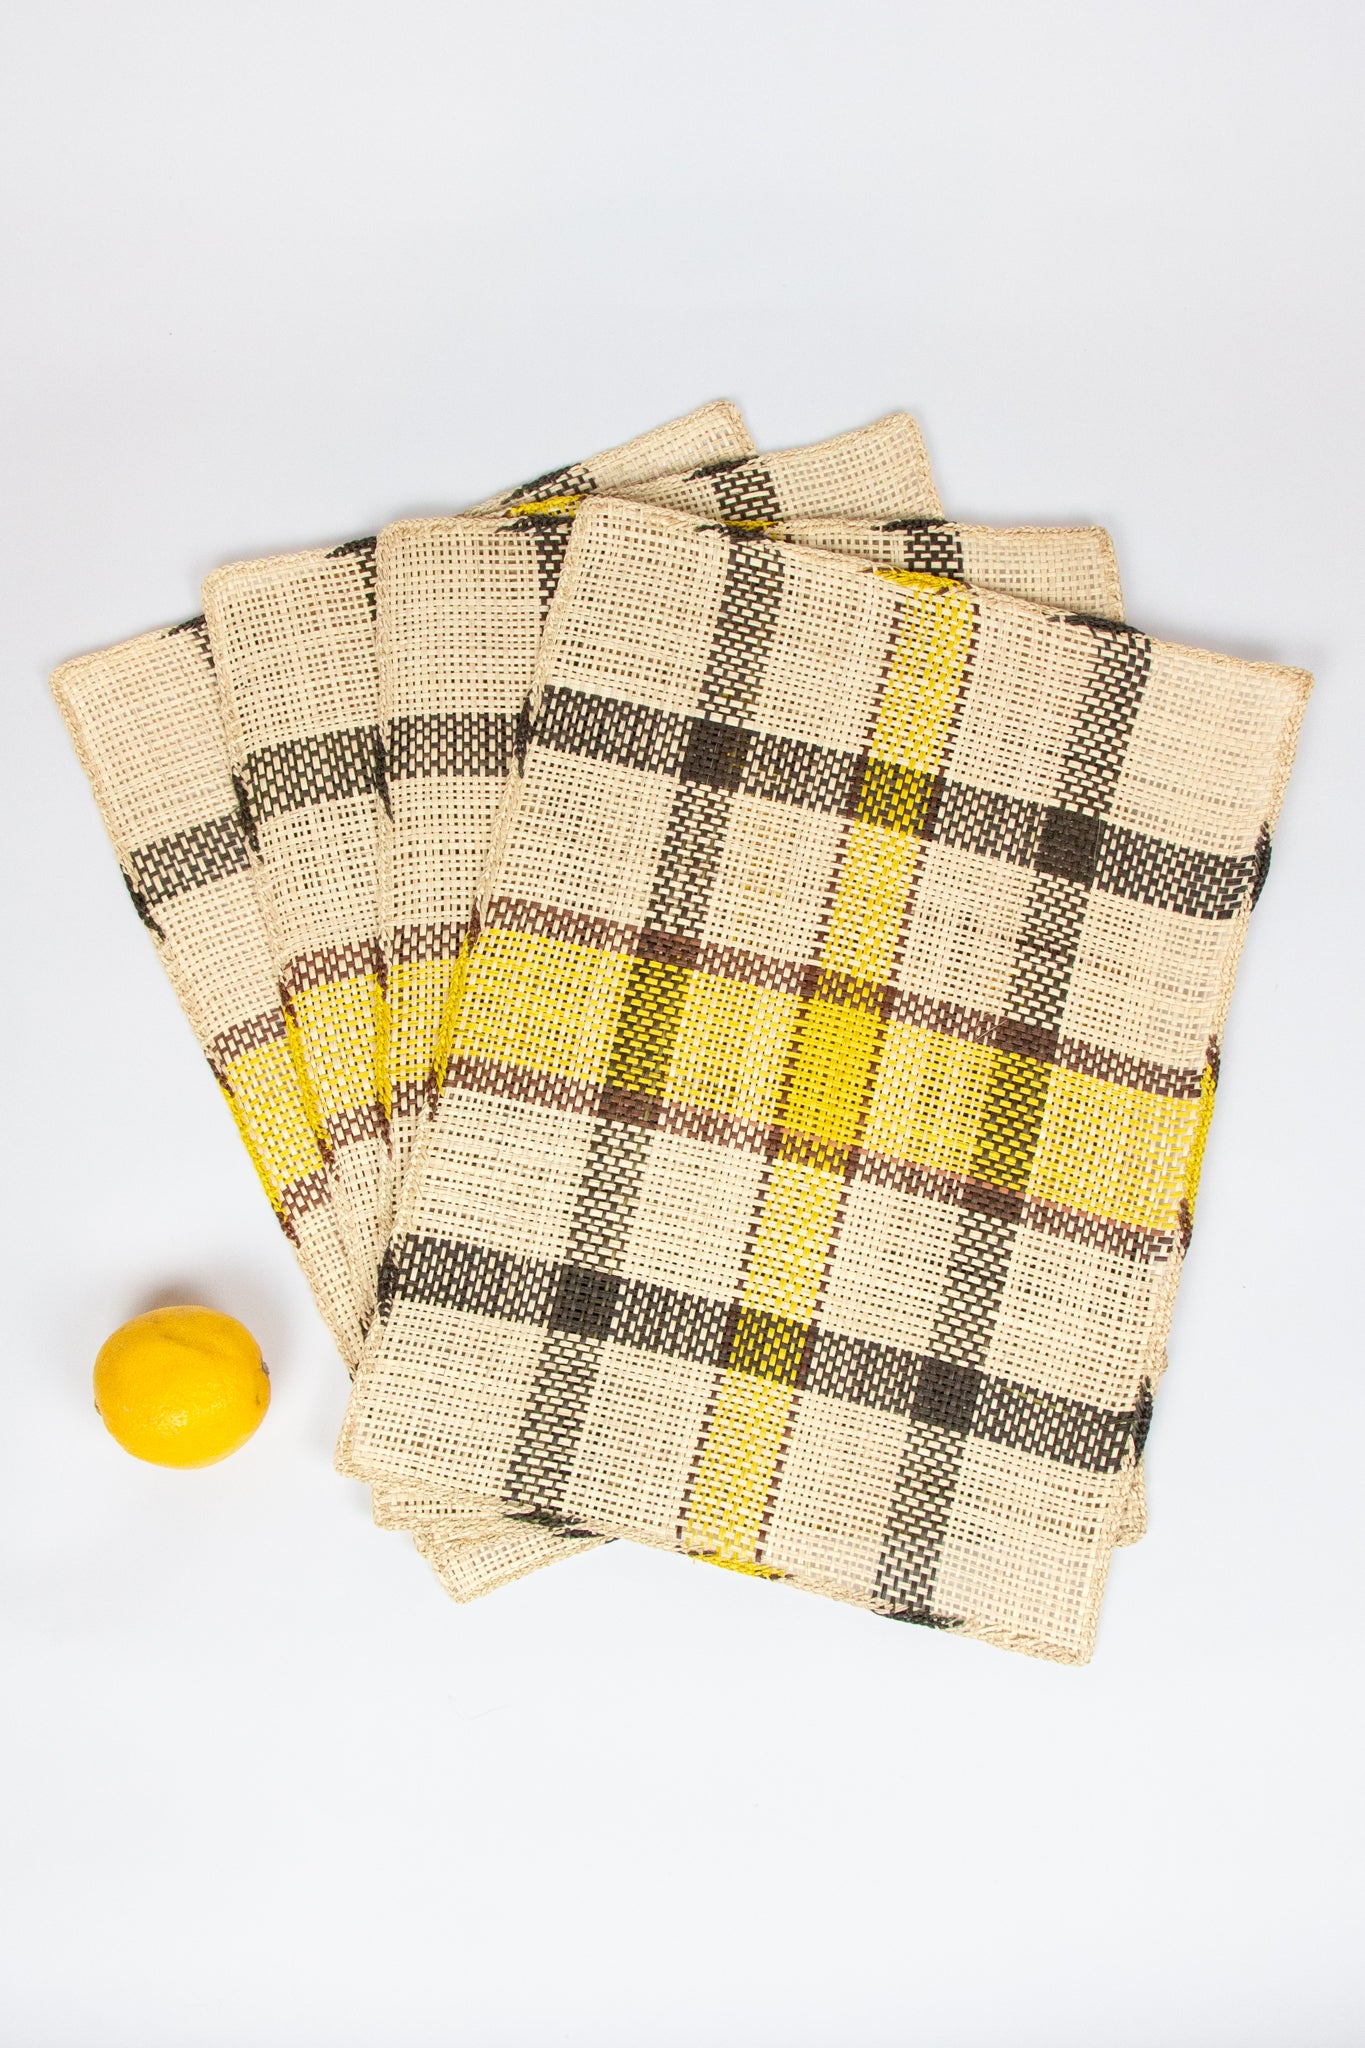 Handwoven Iraca Placemats - Natural Brown & Yellow